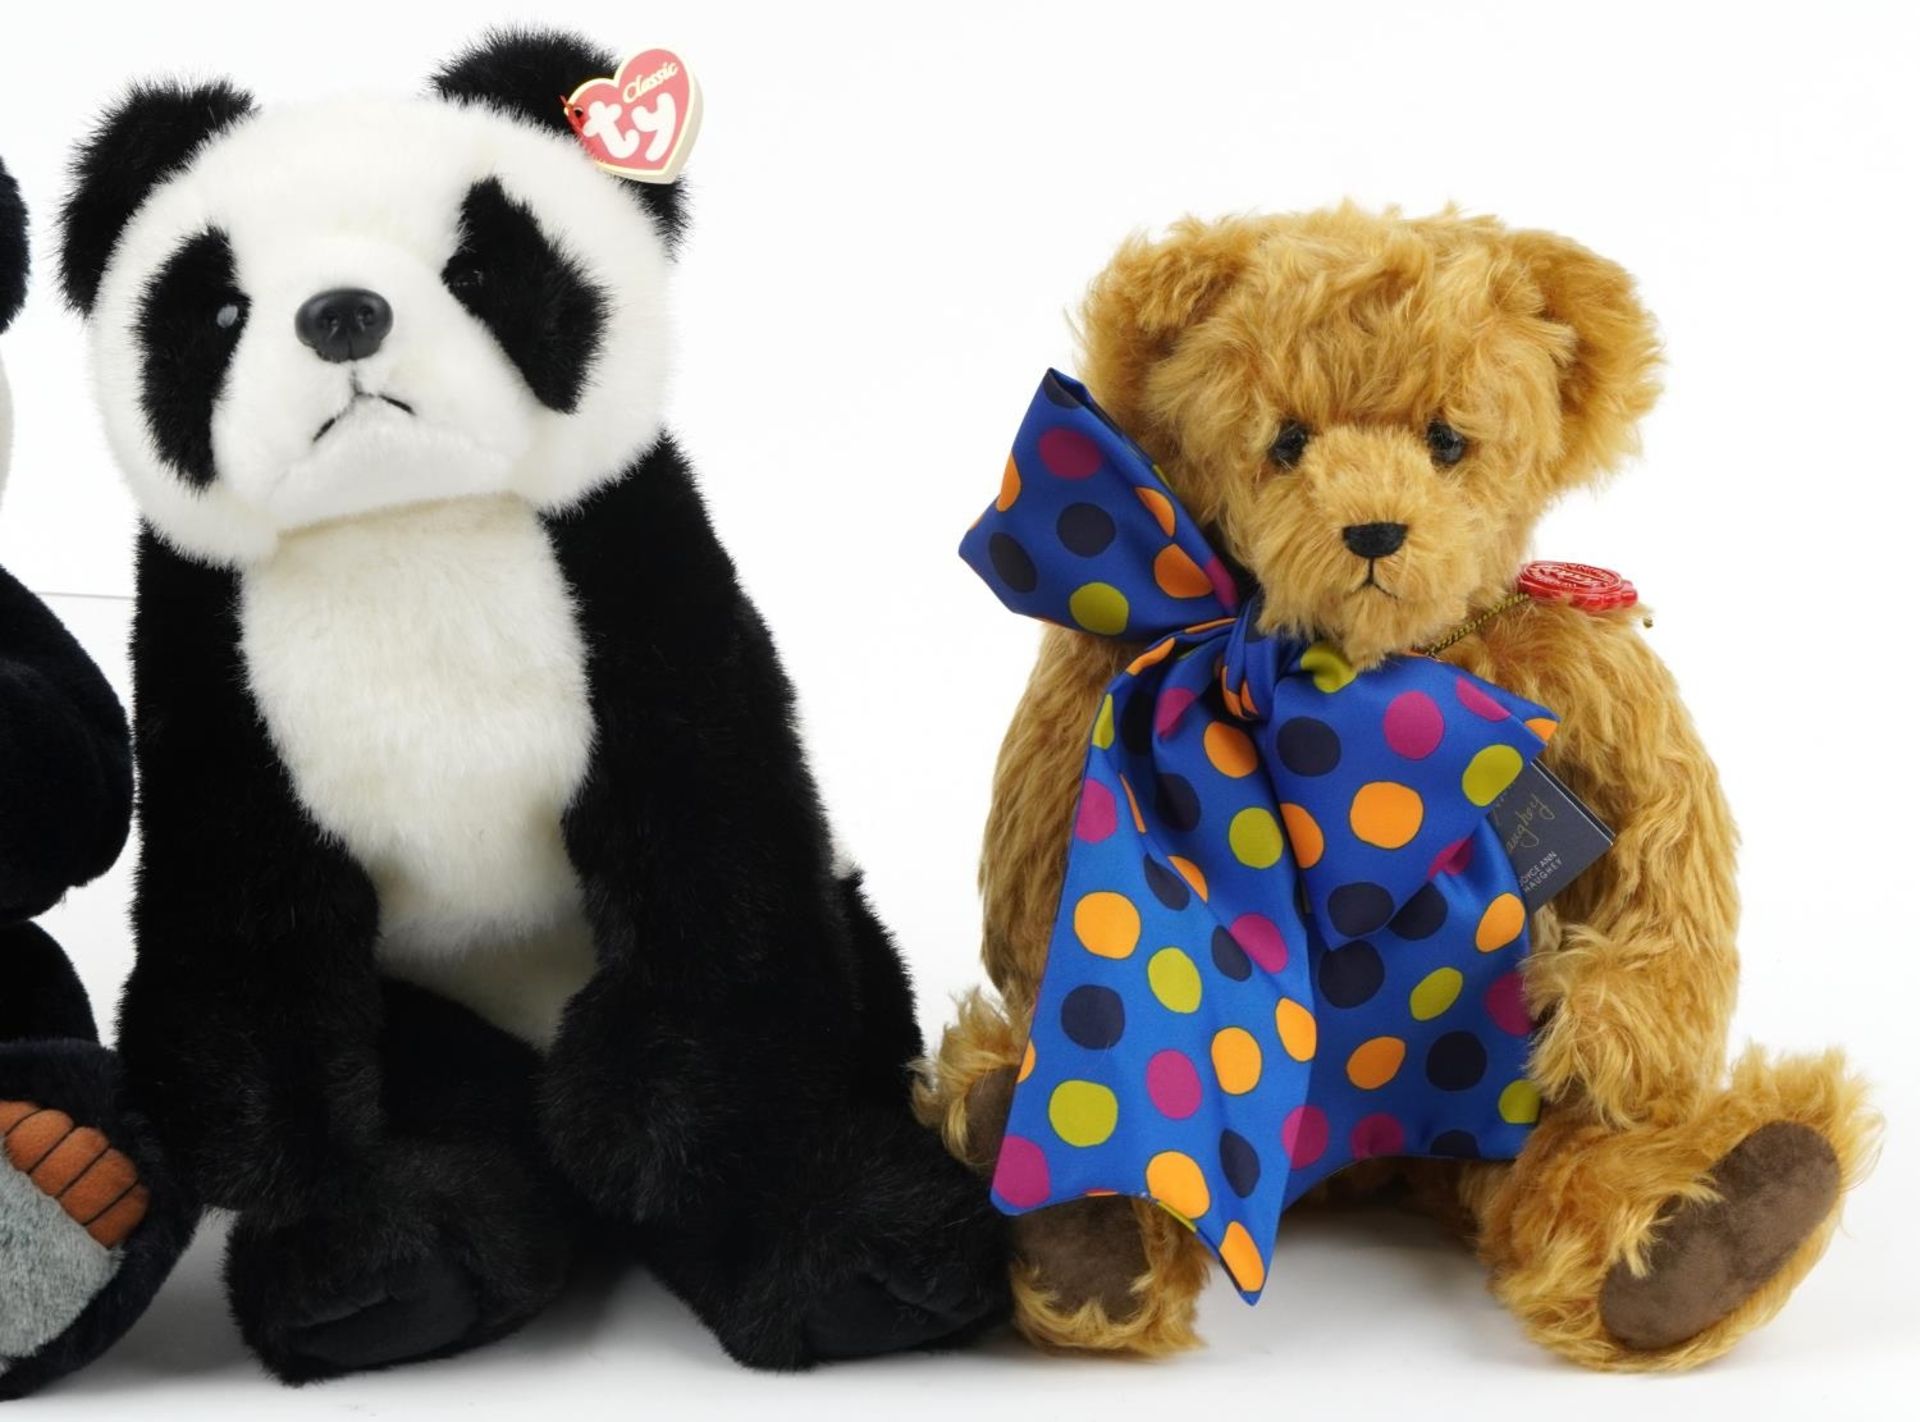 Hermann teddy bear with jointed limbs and three soft toy pandas, 42cm high - Image 3 of 8